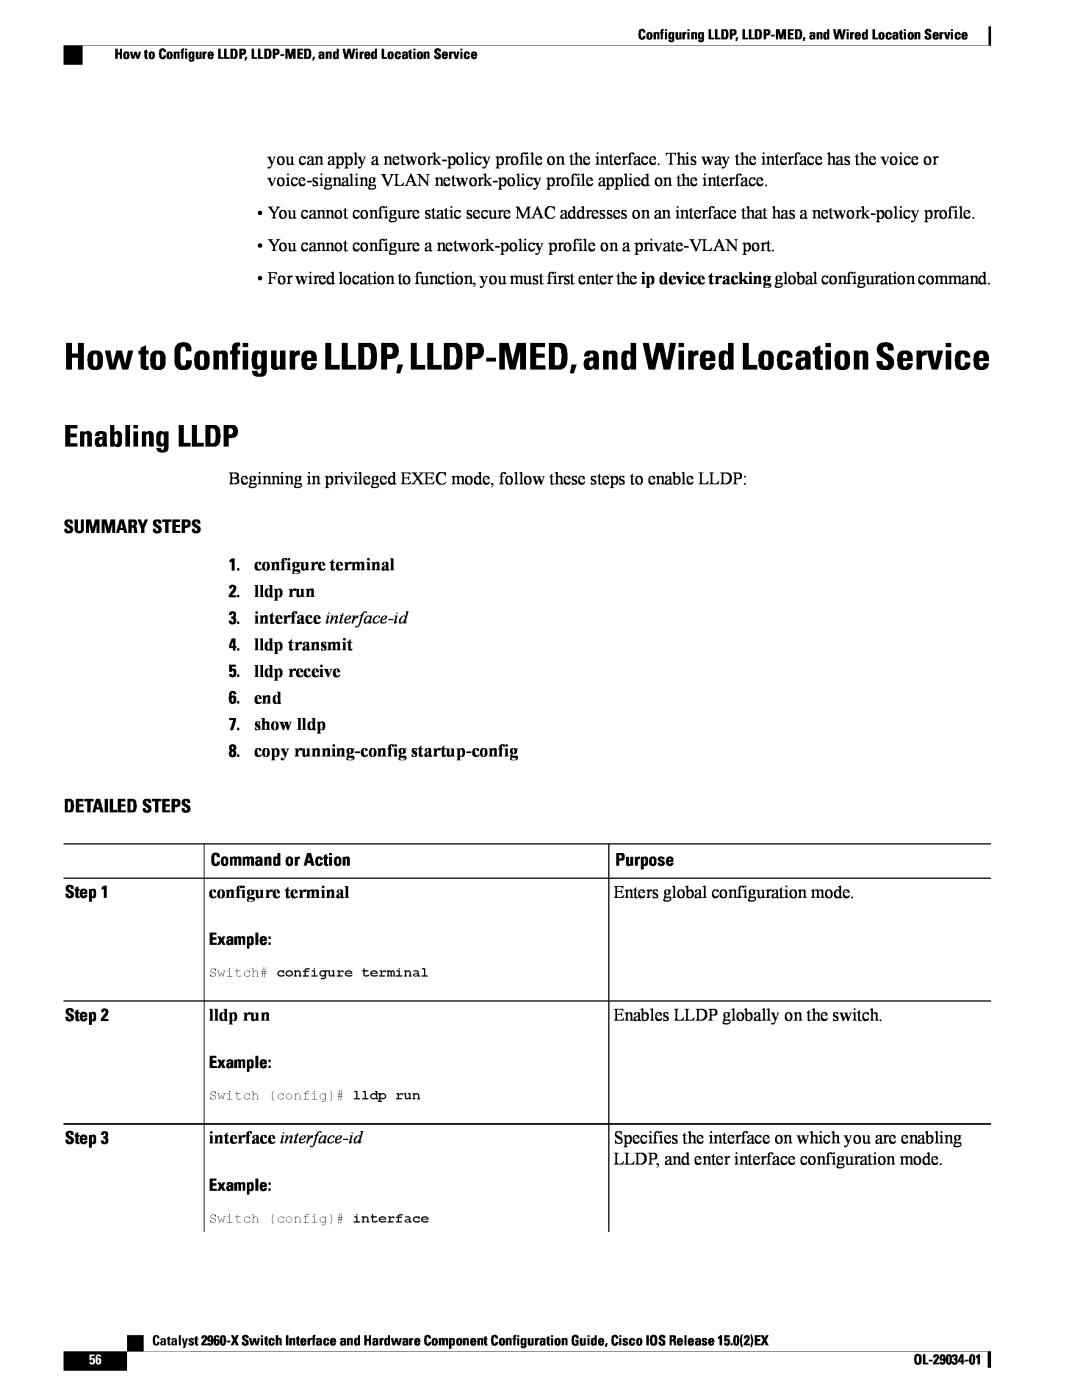 Cisco Systems WSC2960X48TDL How to Configure LLDP, LLDP-MED, and Wired Location Service, Enabling LLDP, lldp run, Purpose 